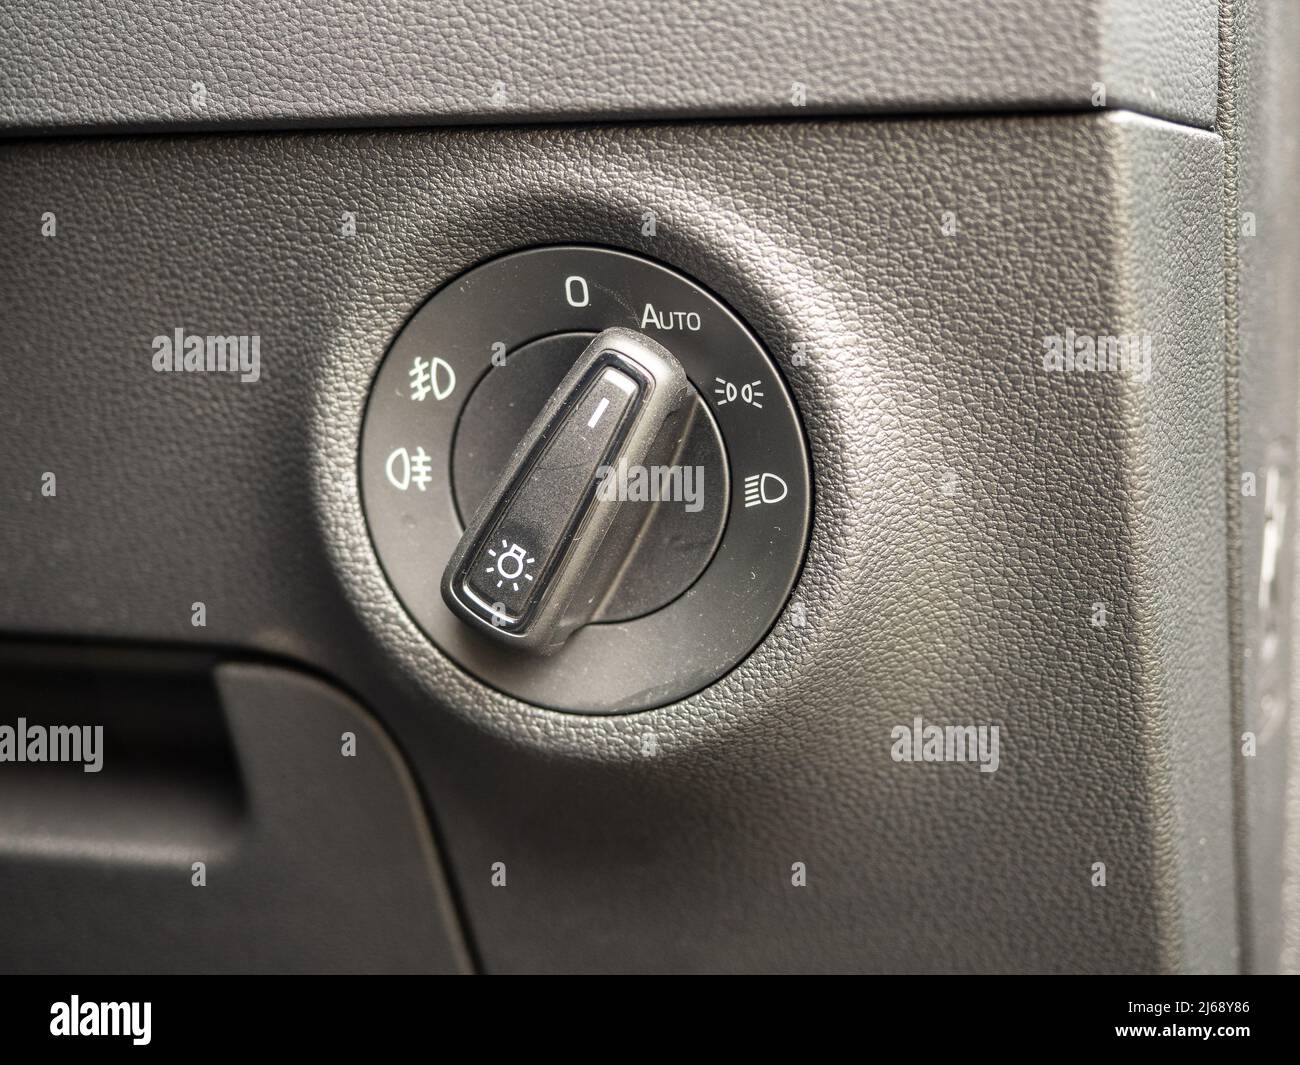 typical standard Light Cluster switch to set up auto runnng light in car vehicle Stock Photo